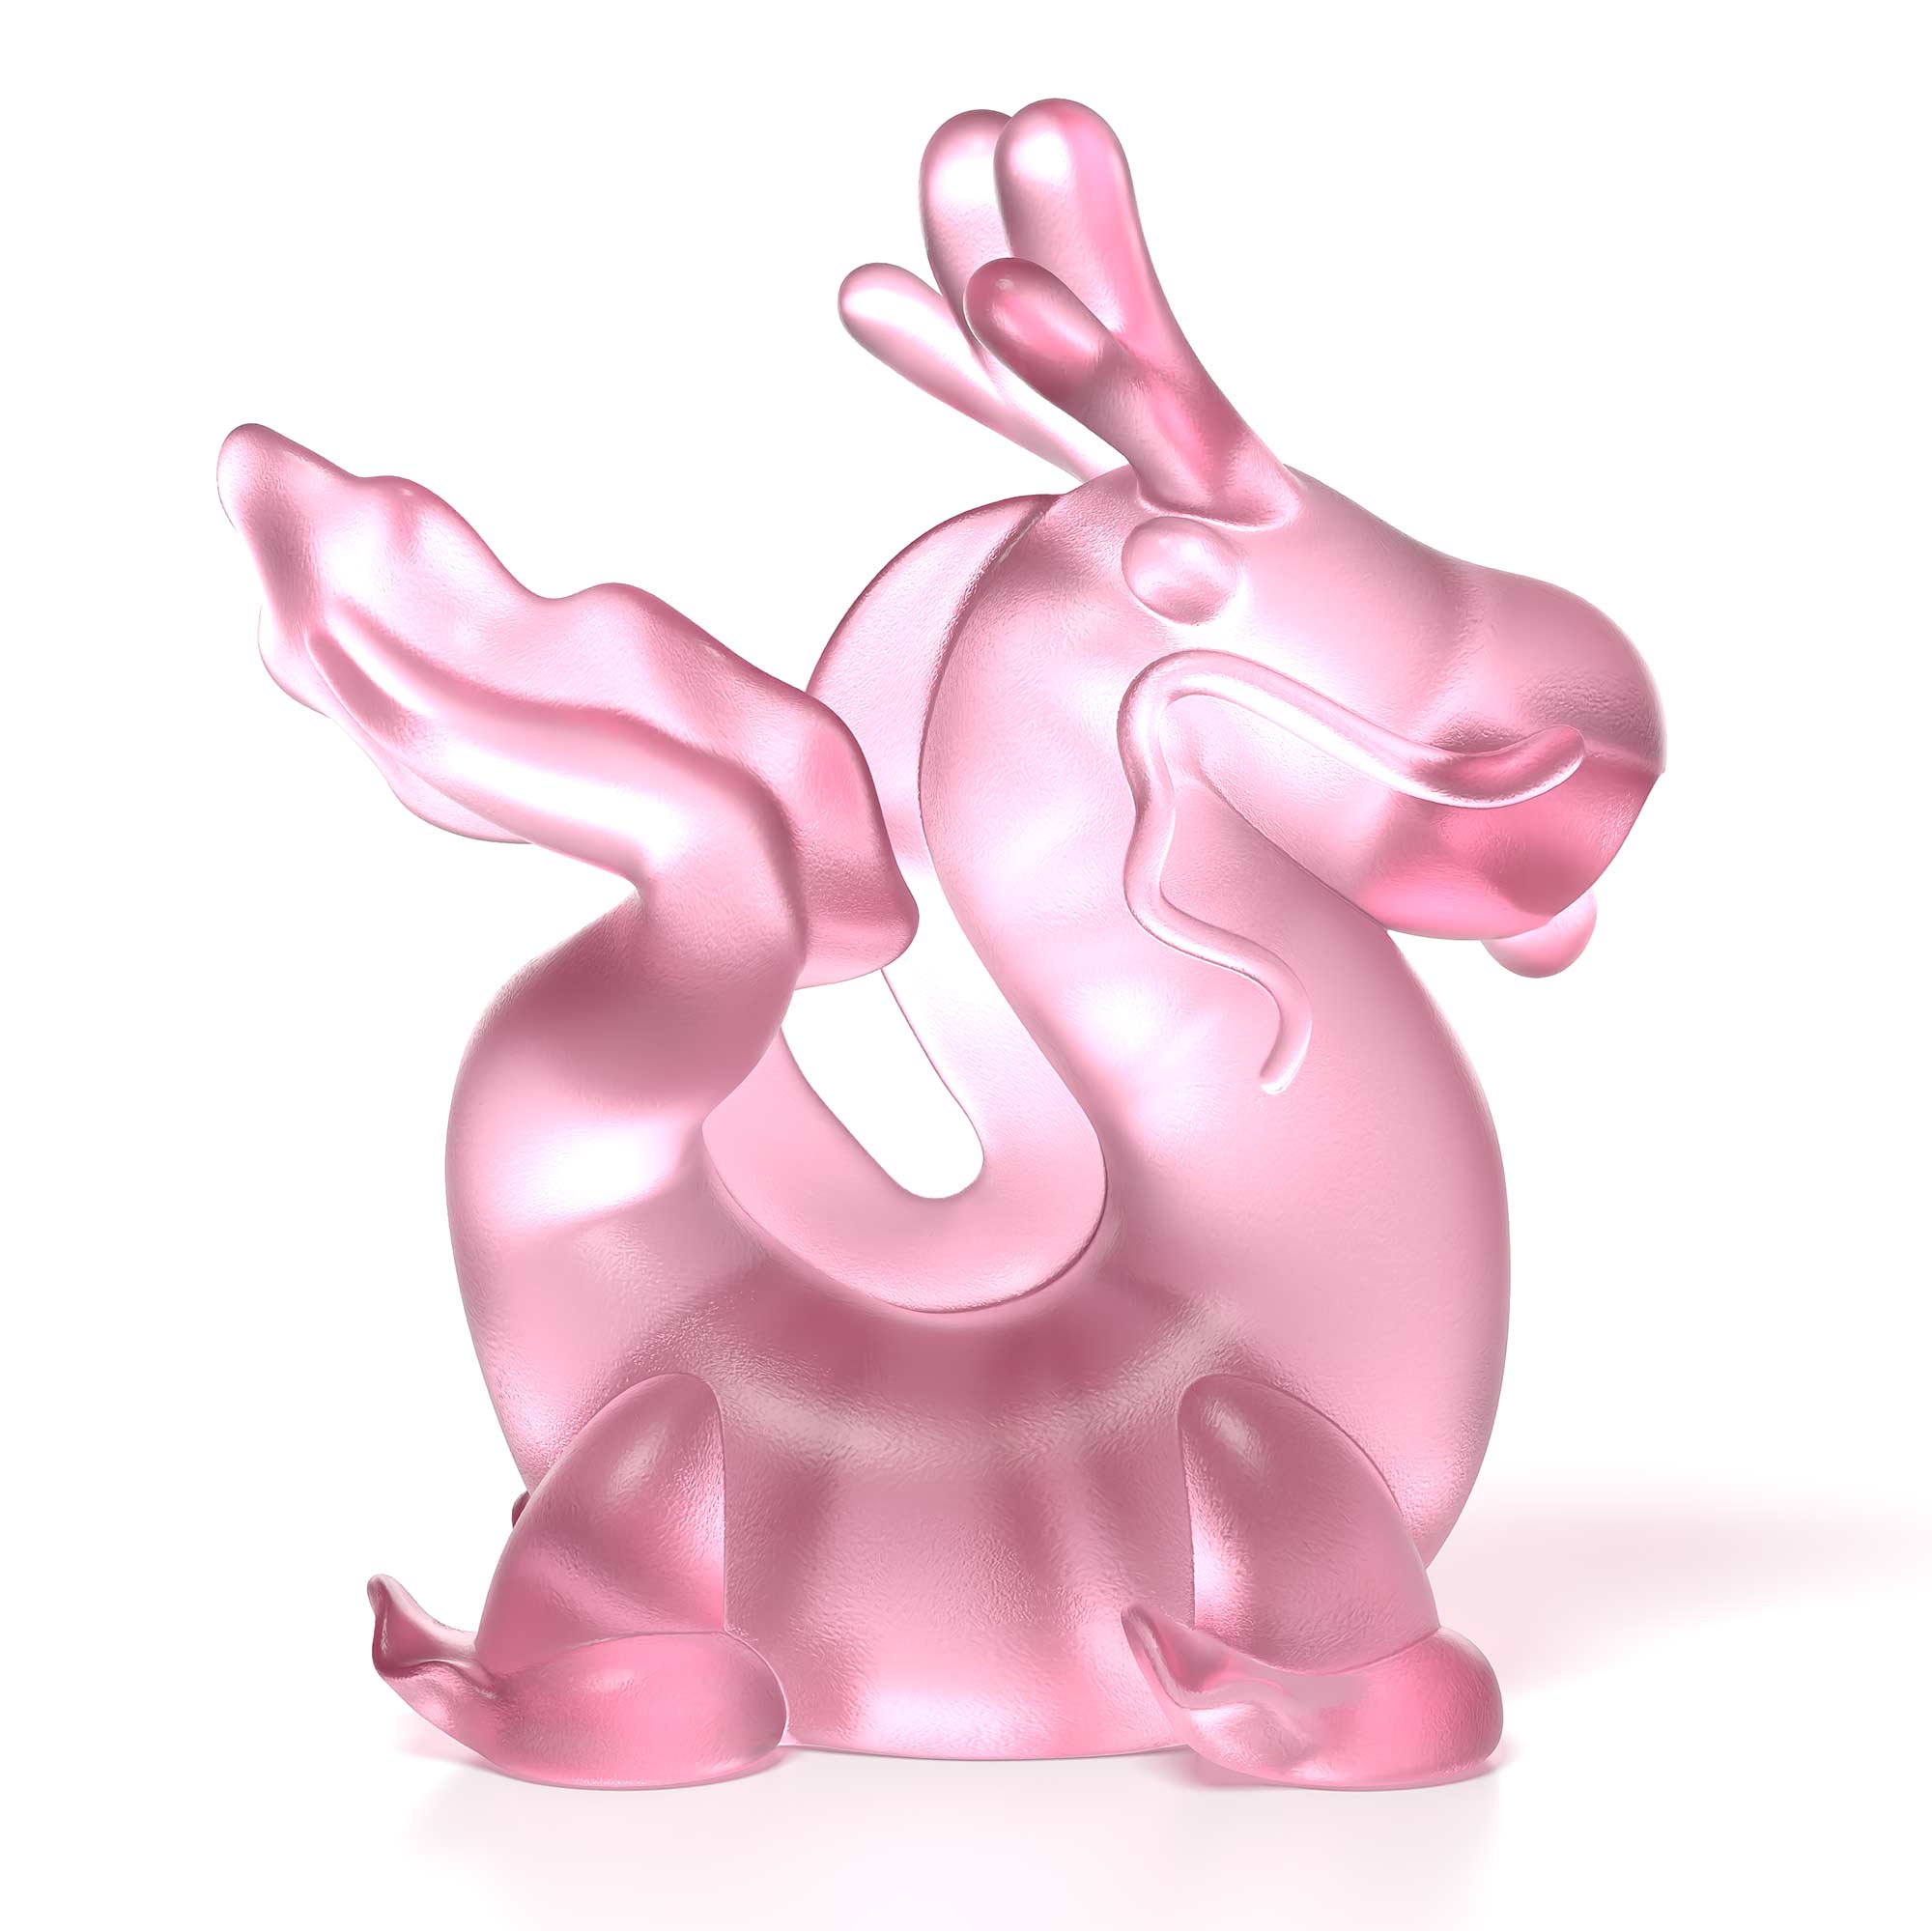 Dragon's Breath pink crystal sculpture the size is  16 cm height, by Ferdi B Dick,  Limited edition of 50 side view 2